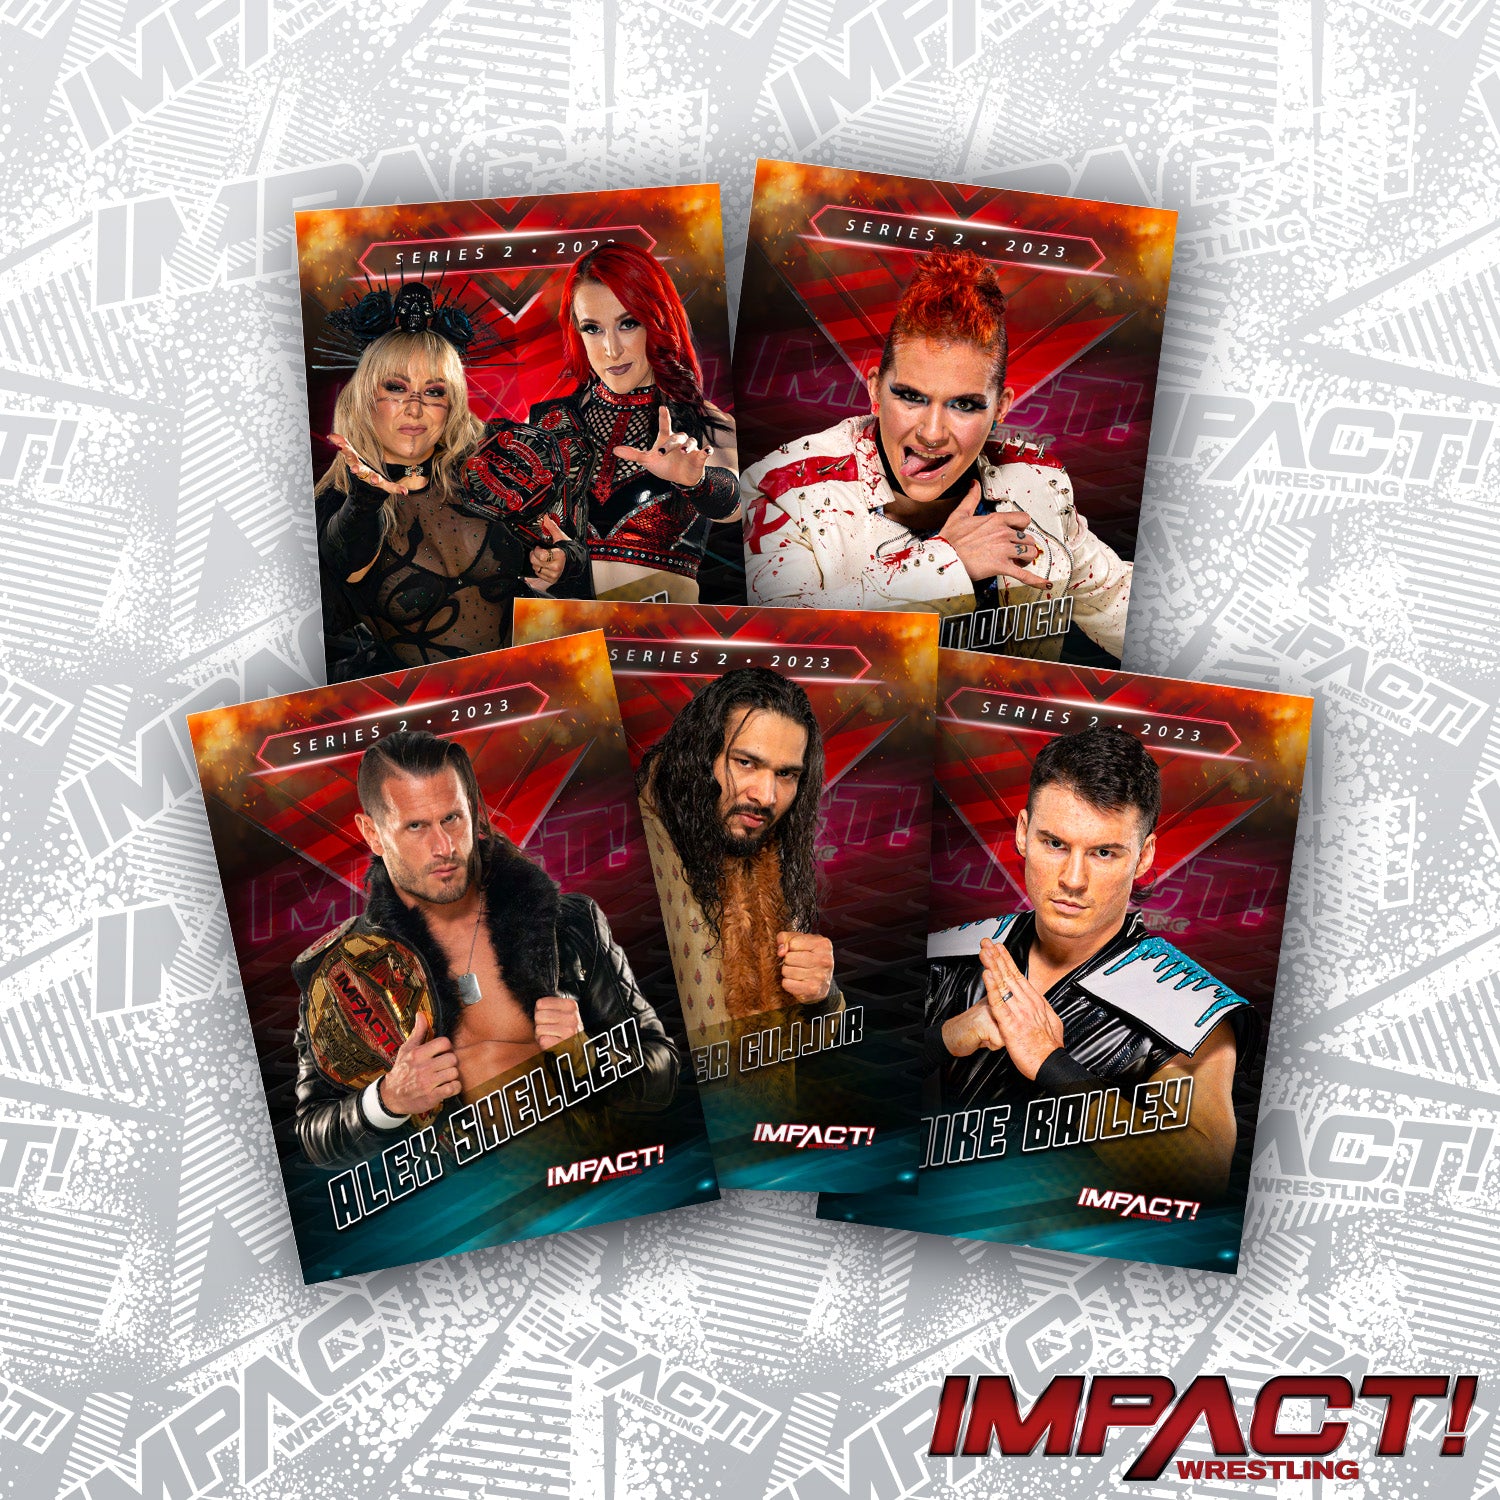 IMPACT Wrestling 2023 Series 2 Trading Cards by NERDS Clothing (1 Pack)